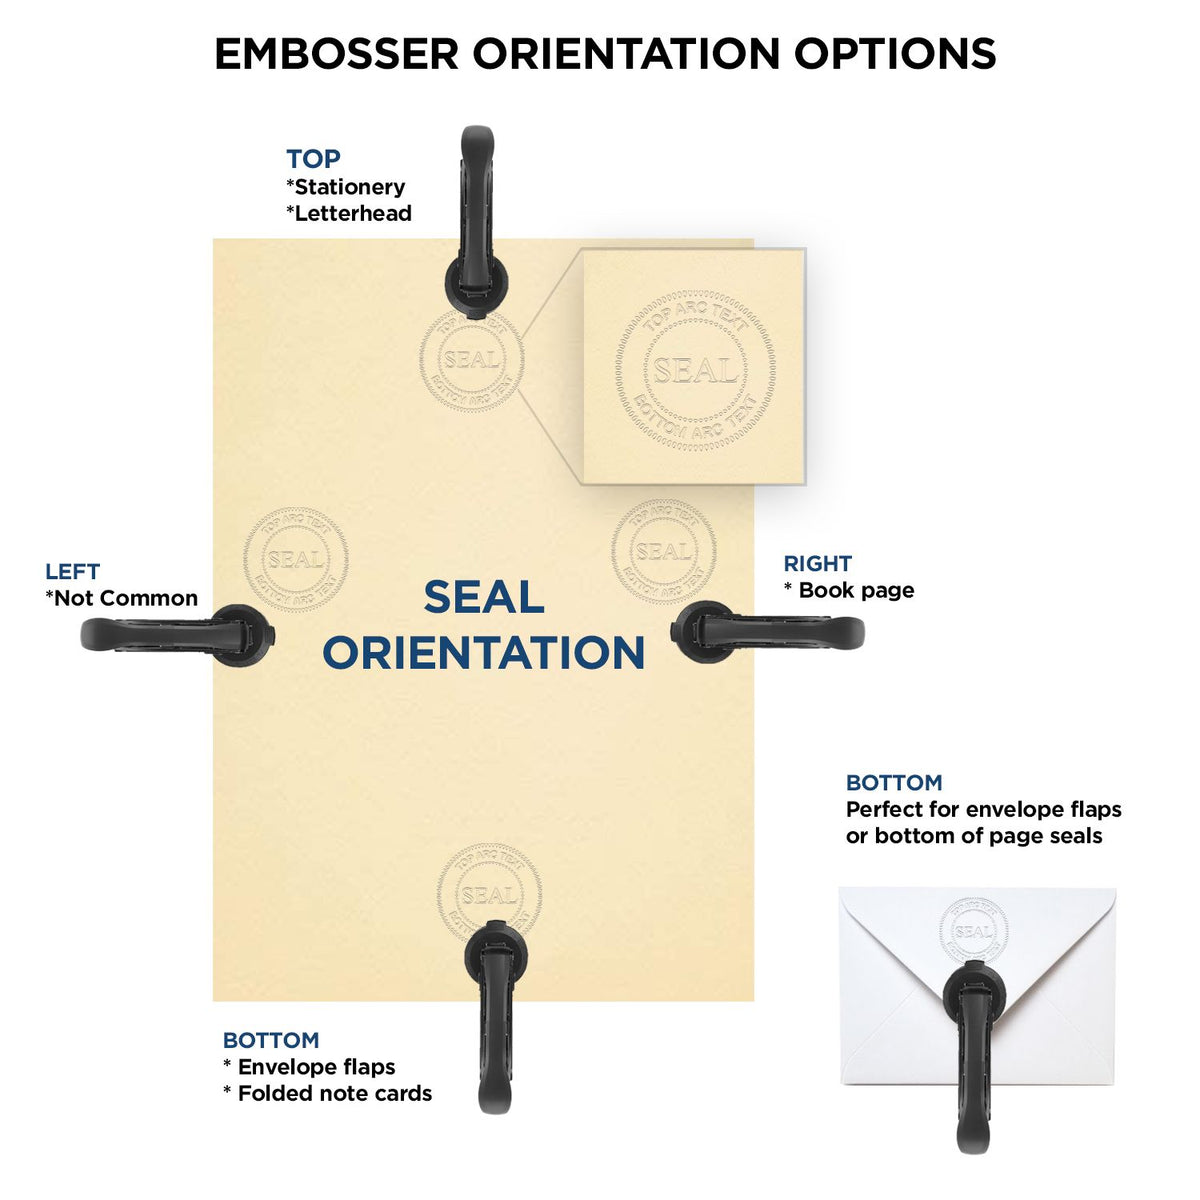 An infographic for the Long Reach Delaware Land Surveyor Seal showing embosser orientation, this is showing examples of a top, bottom, right and left insert.